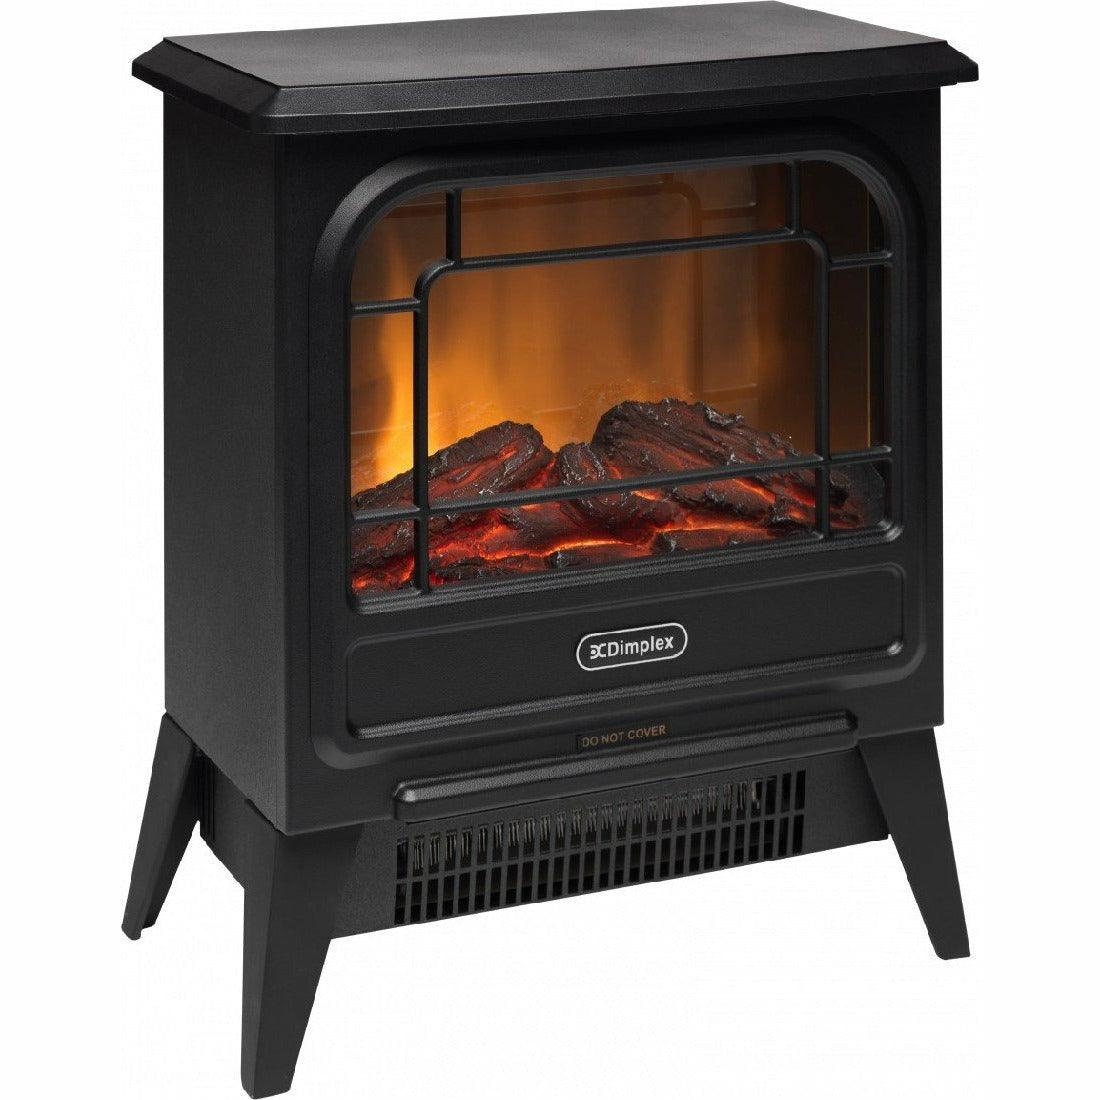 DIMPLEX MICRO STOVE 1.2KW ELECTRIC HEATER